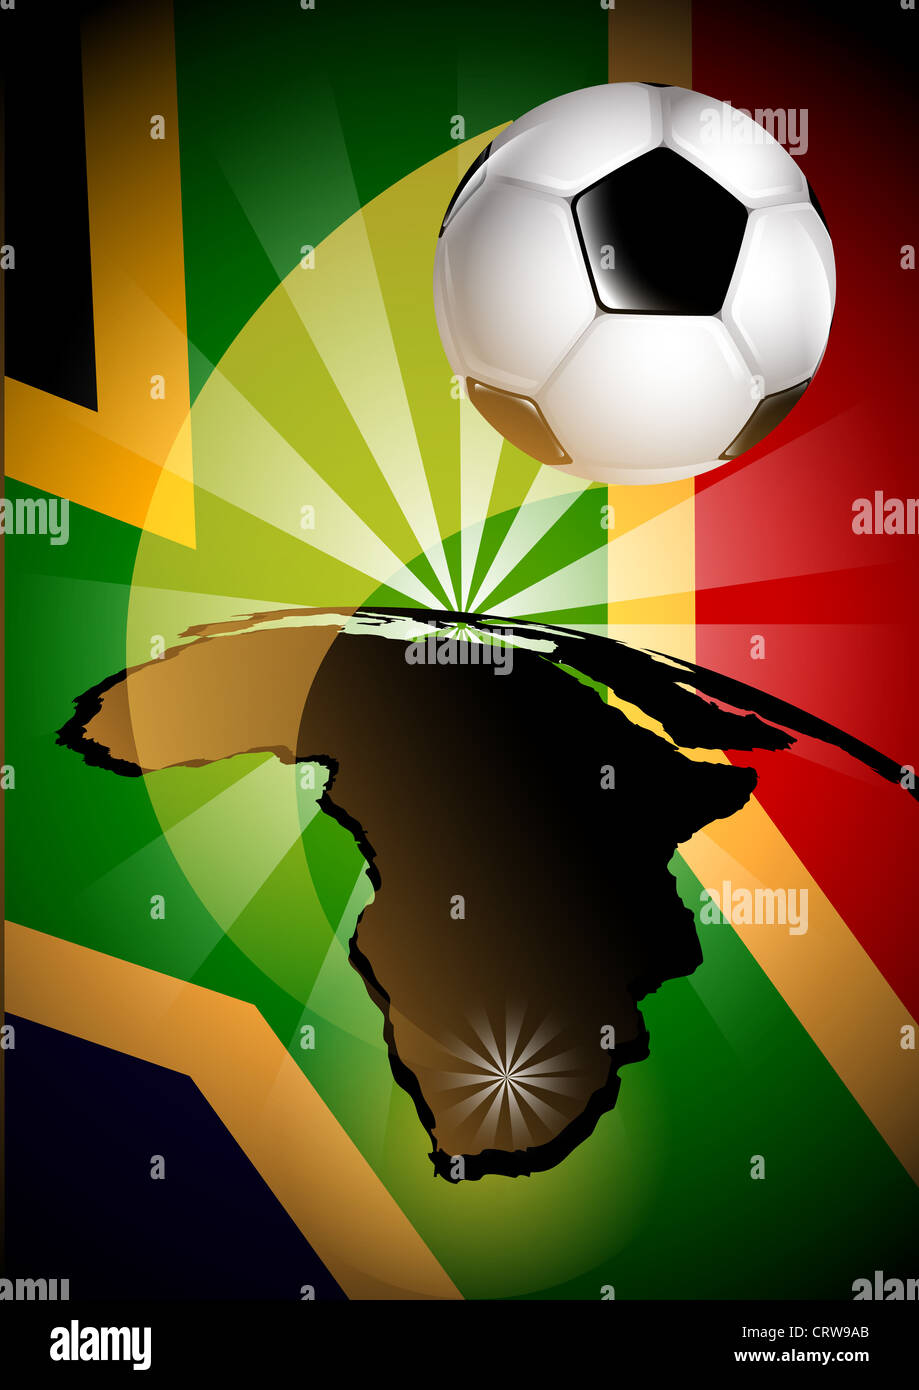 South Africa Flag  Soccer Ball Background Stock Photo